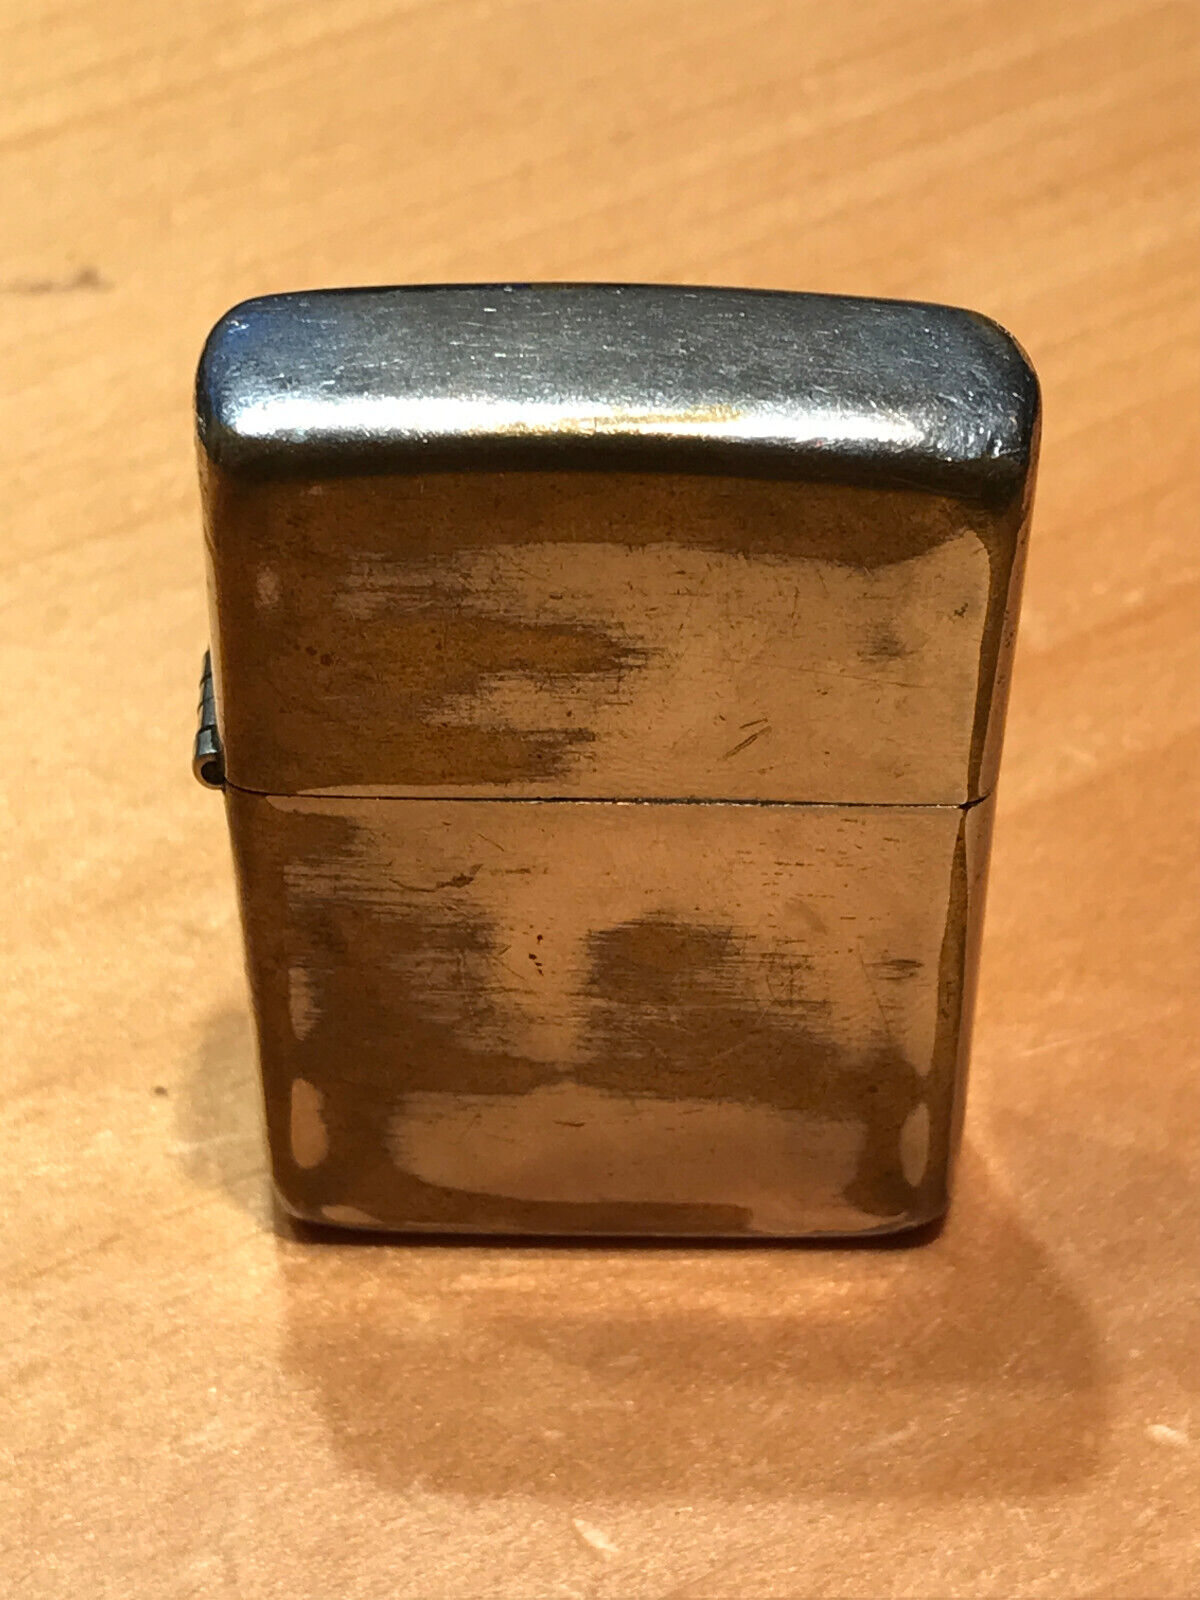 VINTAGE 1968 ZIPPO LIGTHER WORN & FADED GOLD PLATED - GOING CHEAP